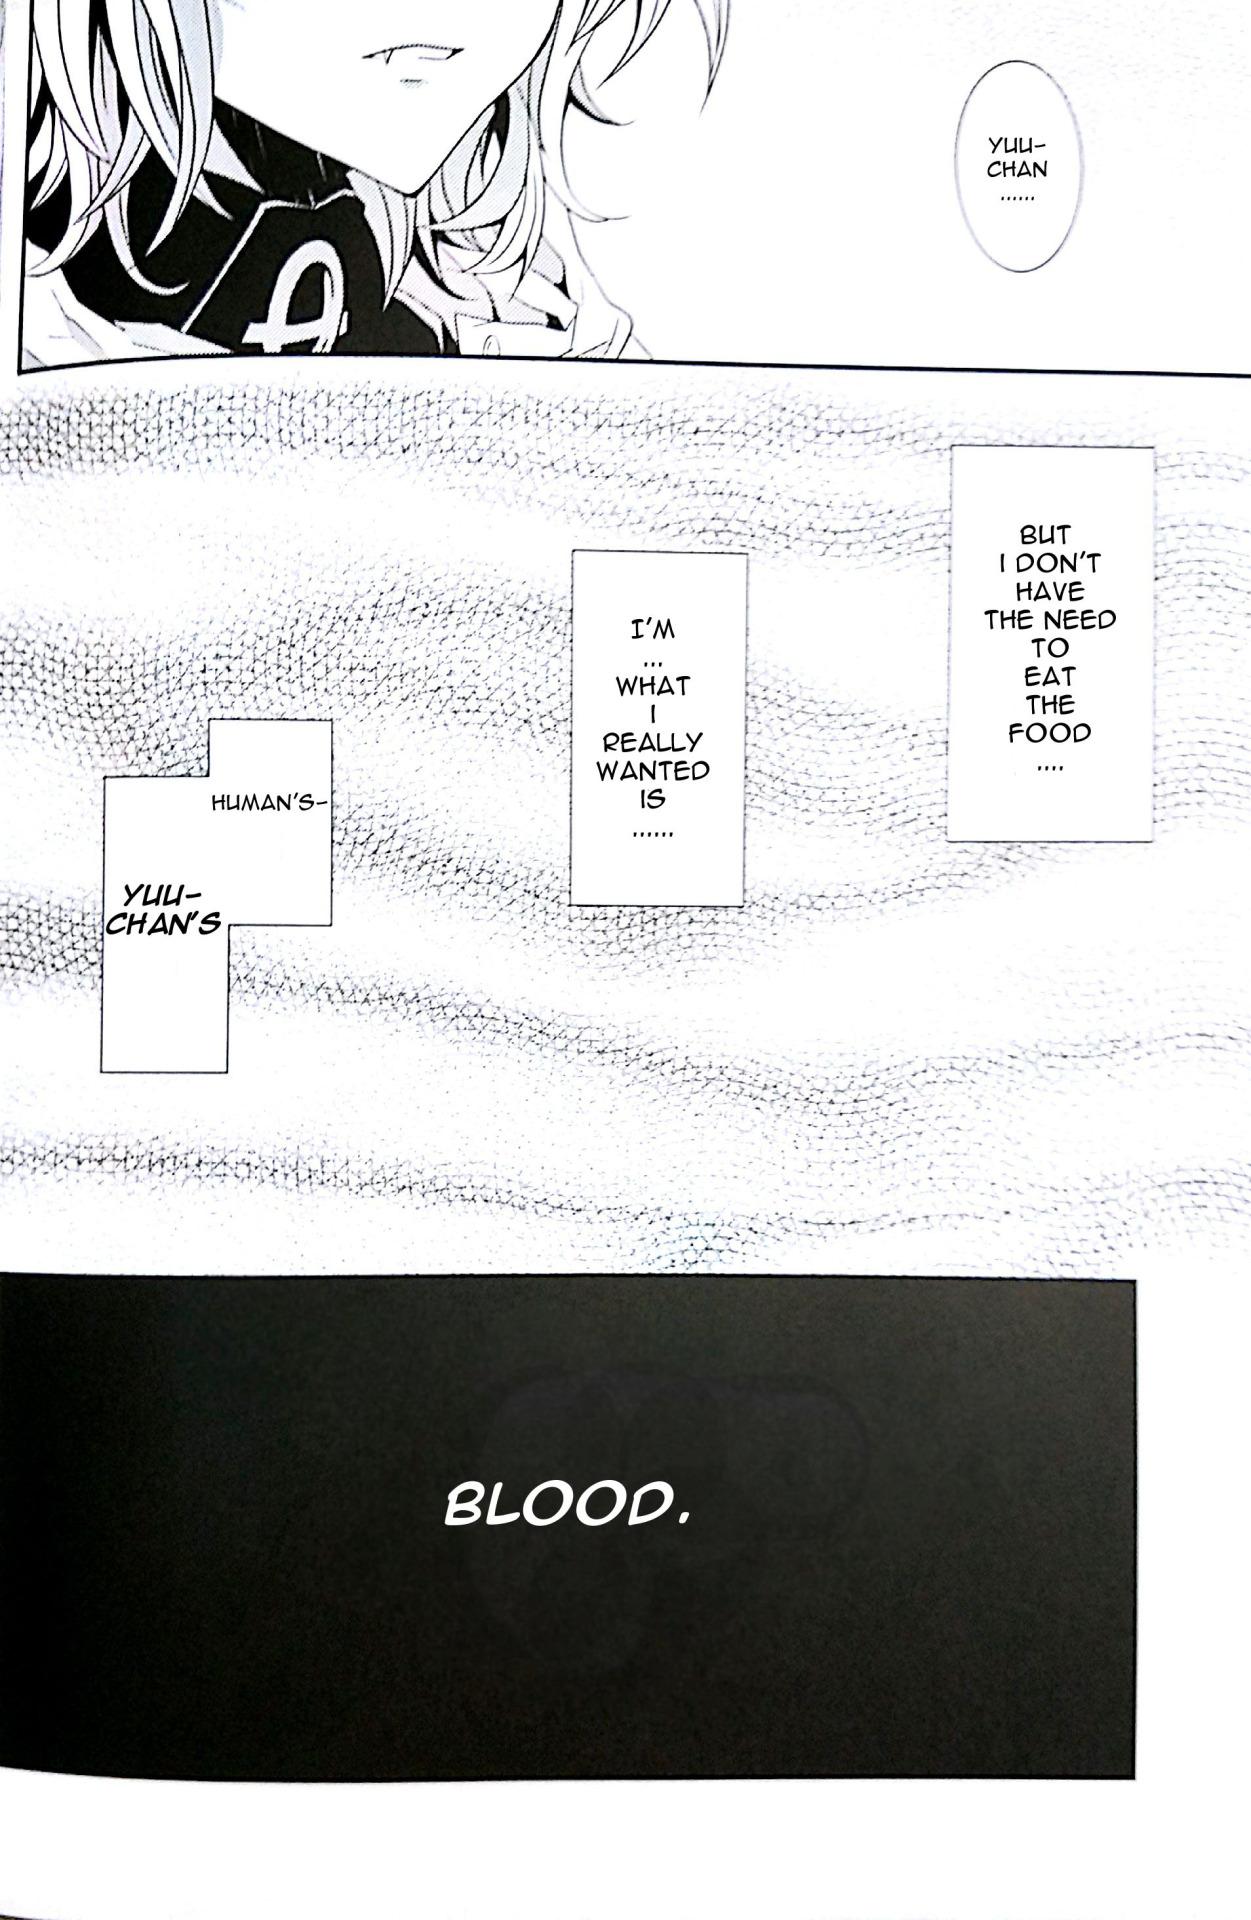 Pool Thirst for blood - Seraph of the end Amiga - Page 6